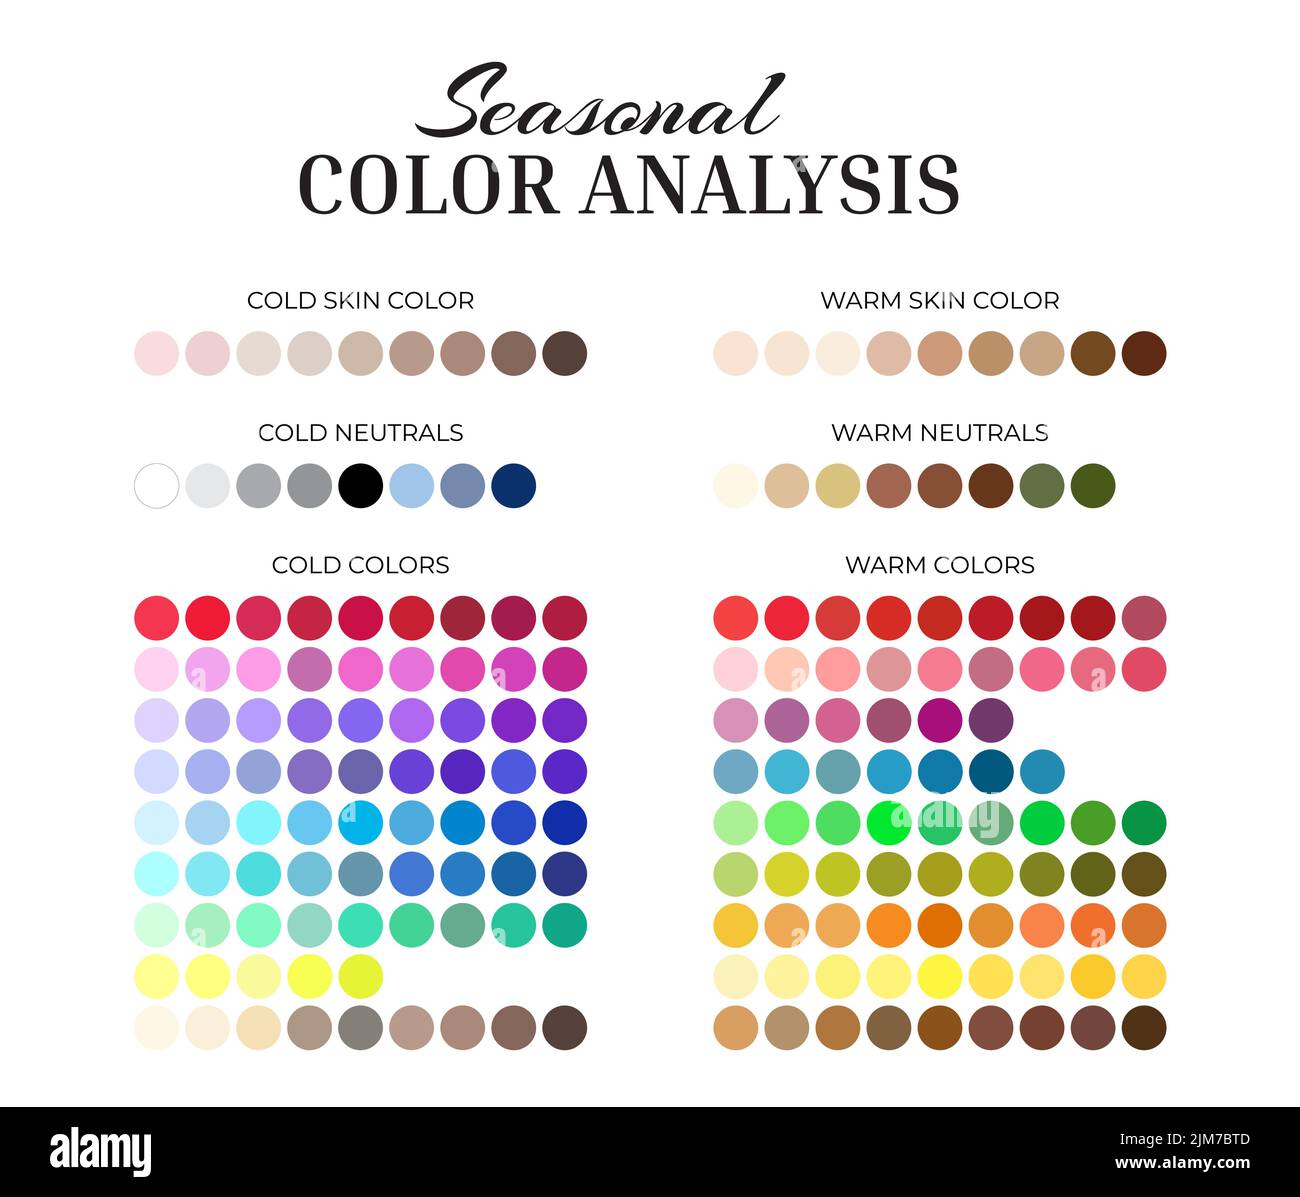 Seasonal Color Analysis Palette with Cold and Warm Color Swatches for Every Color, Neutrals, Skin Shades Stock Vector